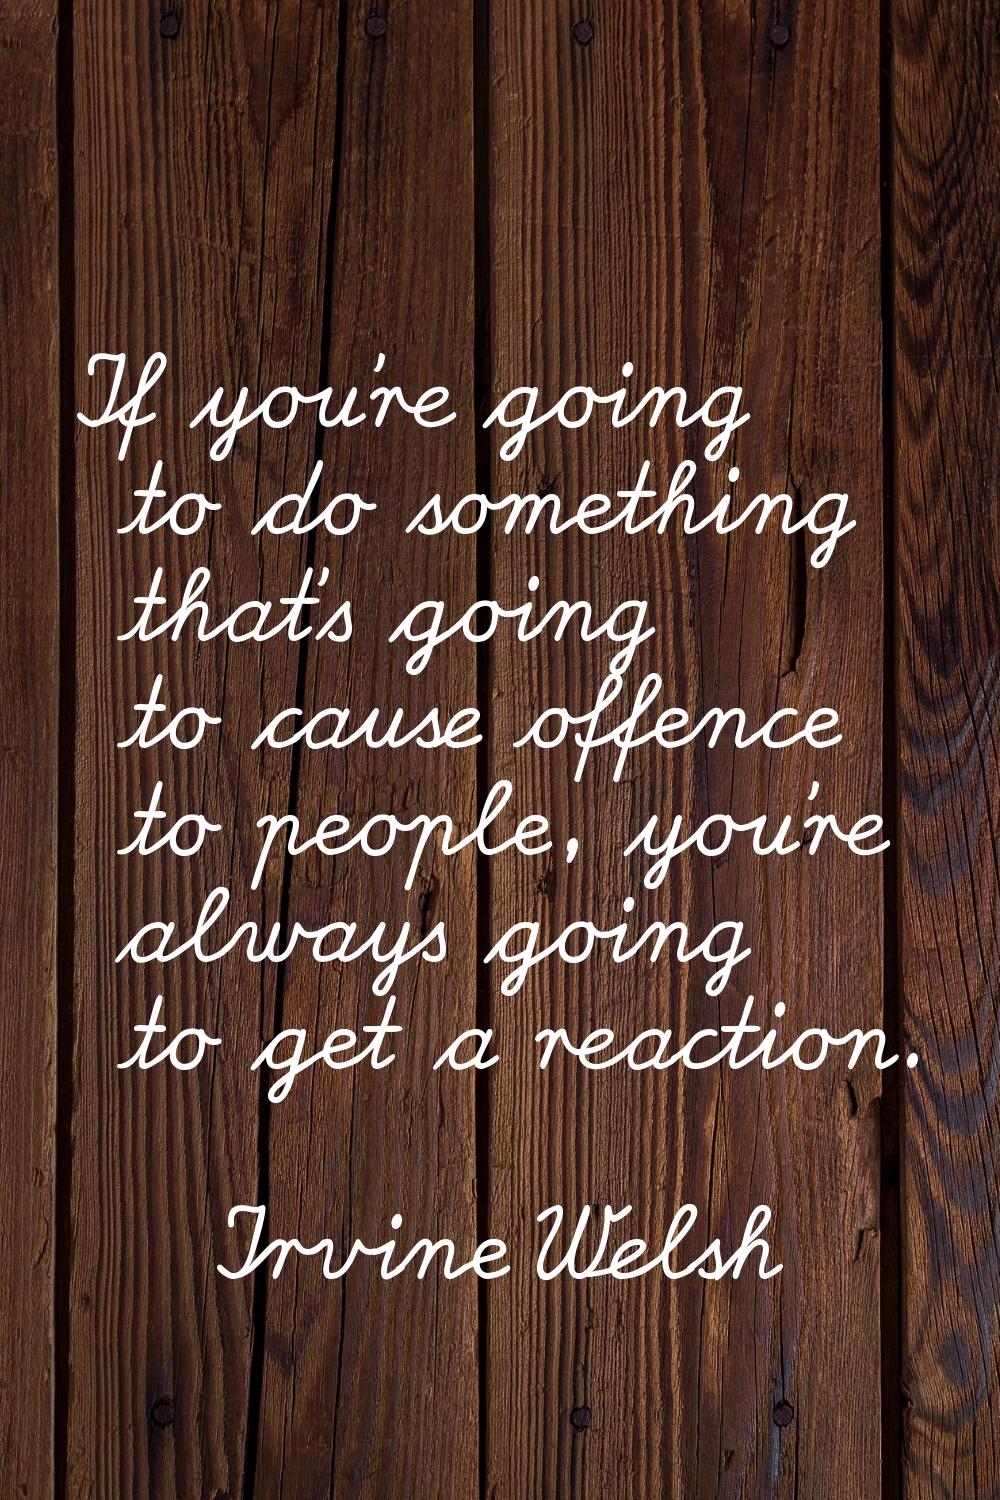 If you're going to do something that's going to cause offence to people, you're always going to get